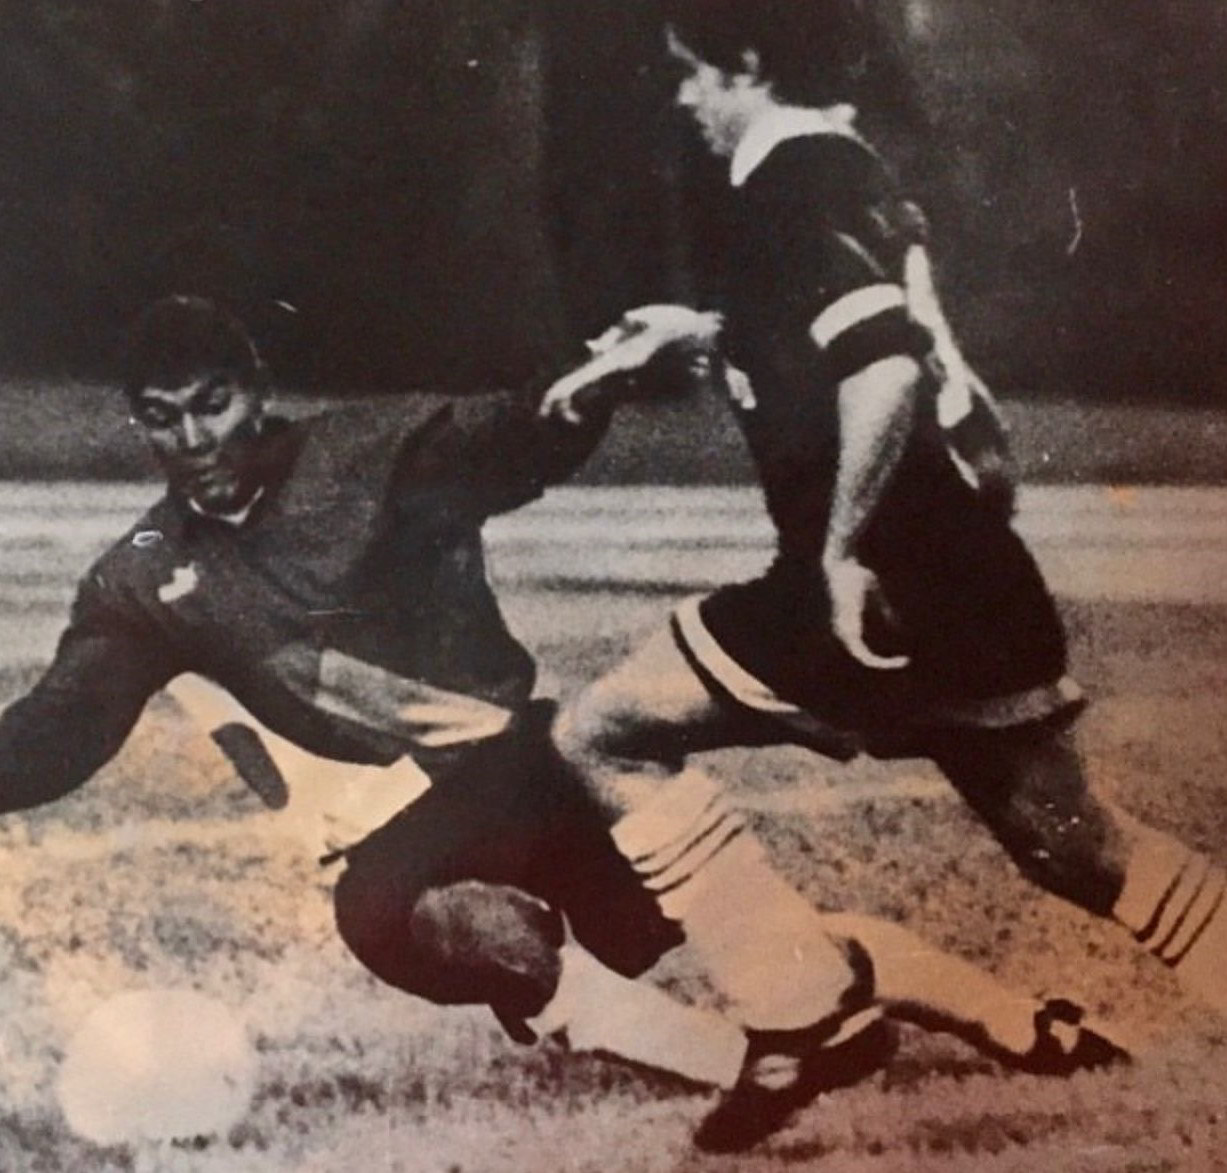 Sebastián Cano Caporales in his days as an active player, representing Carabobo in the final of a national tournament. His motivation came from that past as a footballer